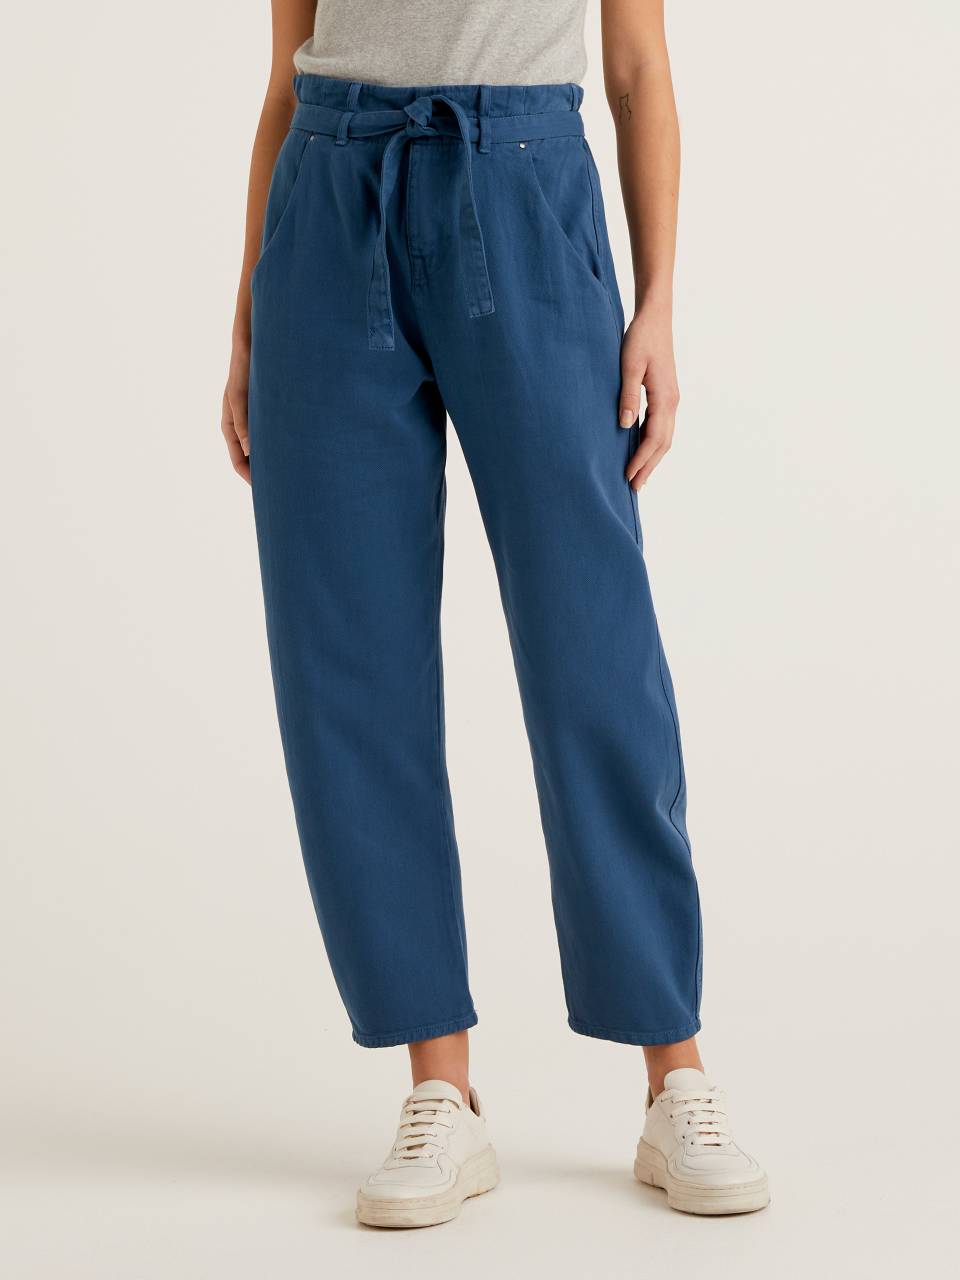 Benetton Paperbag trousers in 100% cotton. 1